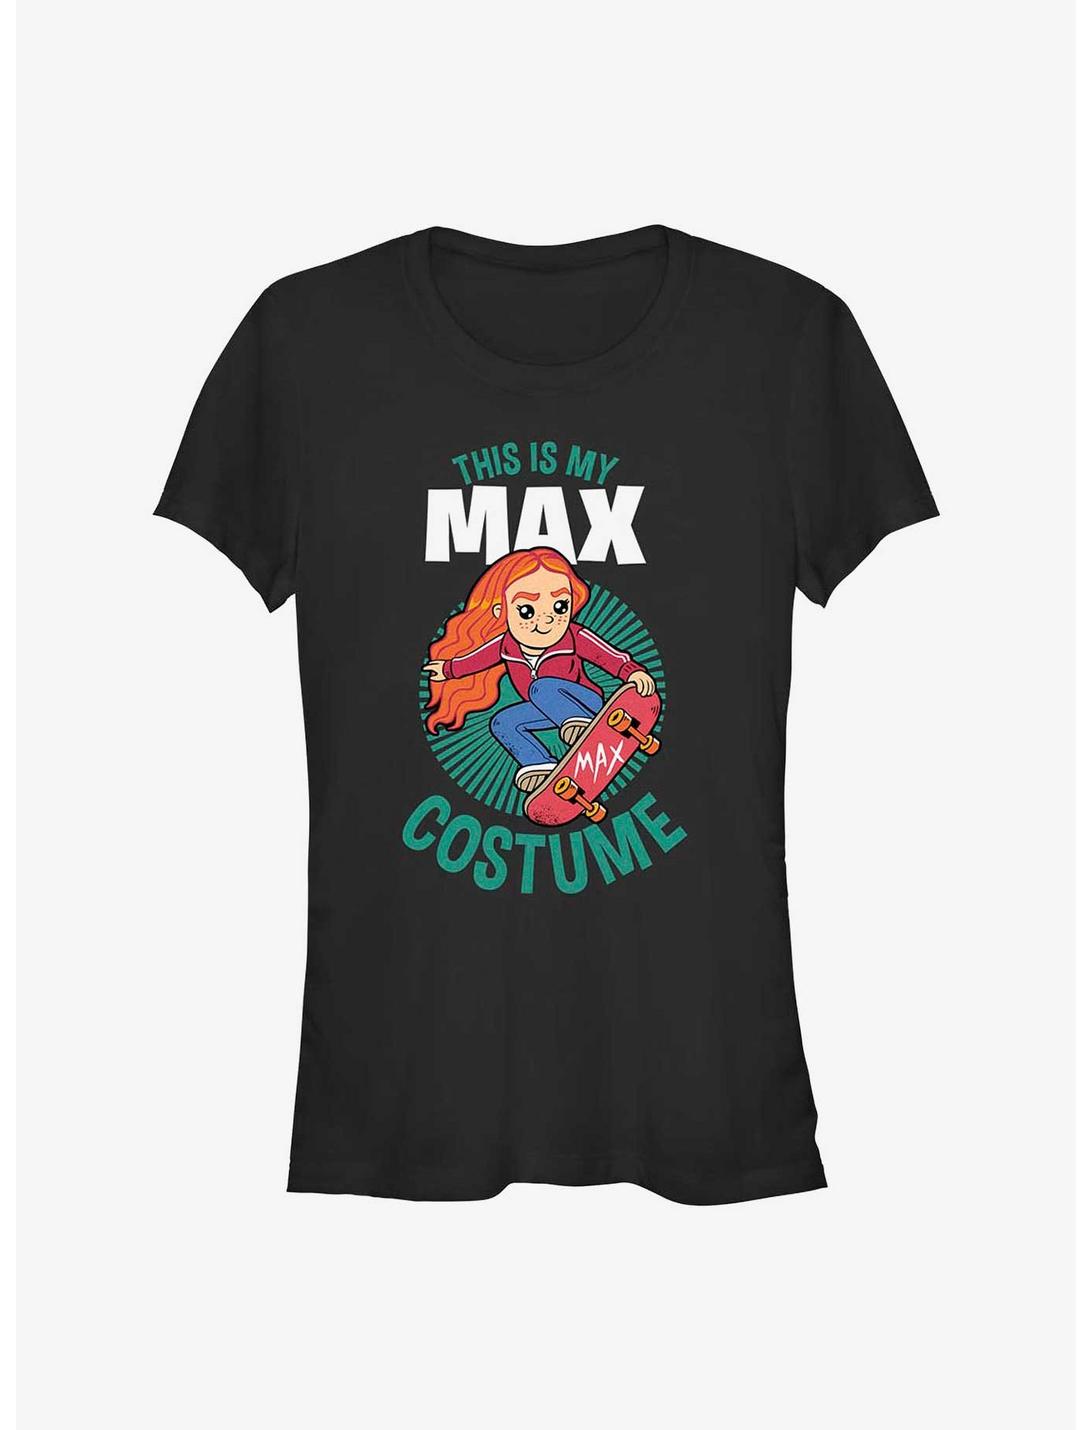 Stranger Things This Is My Max Costume Girls T-Shirt, BLACK, hi-res